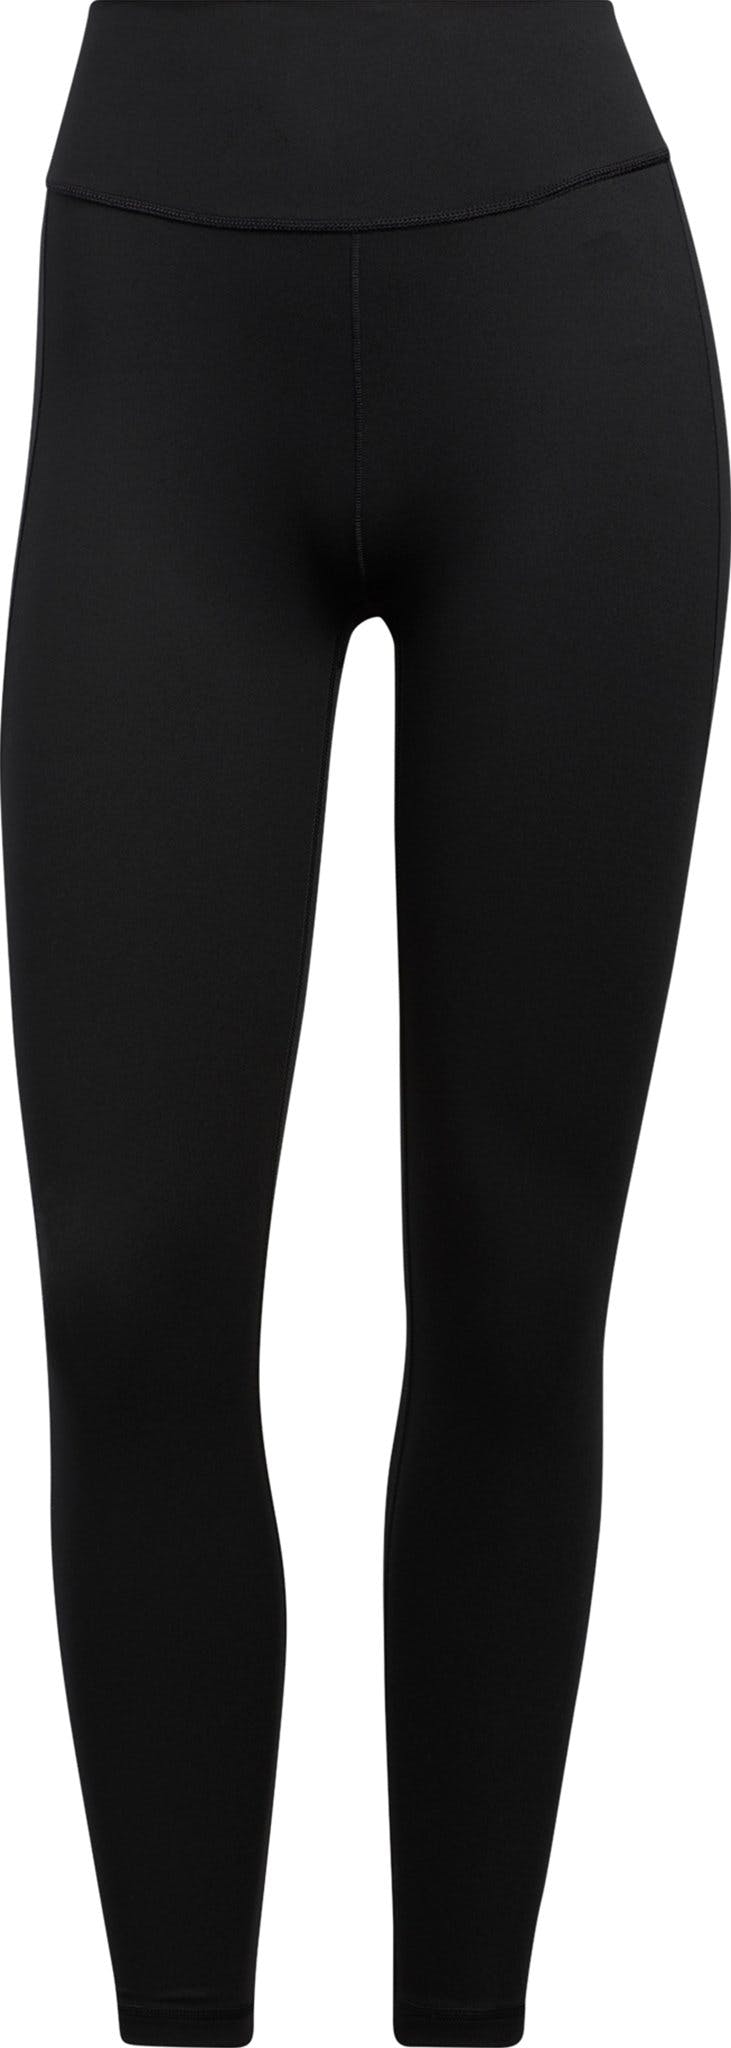 Product image for Yoga Studio 7/8 Tights - Women's